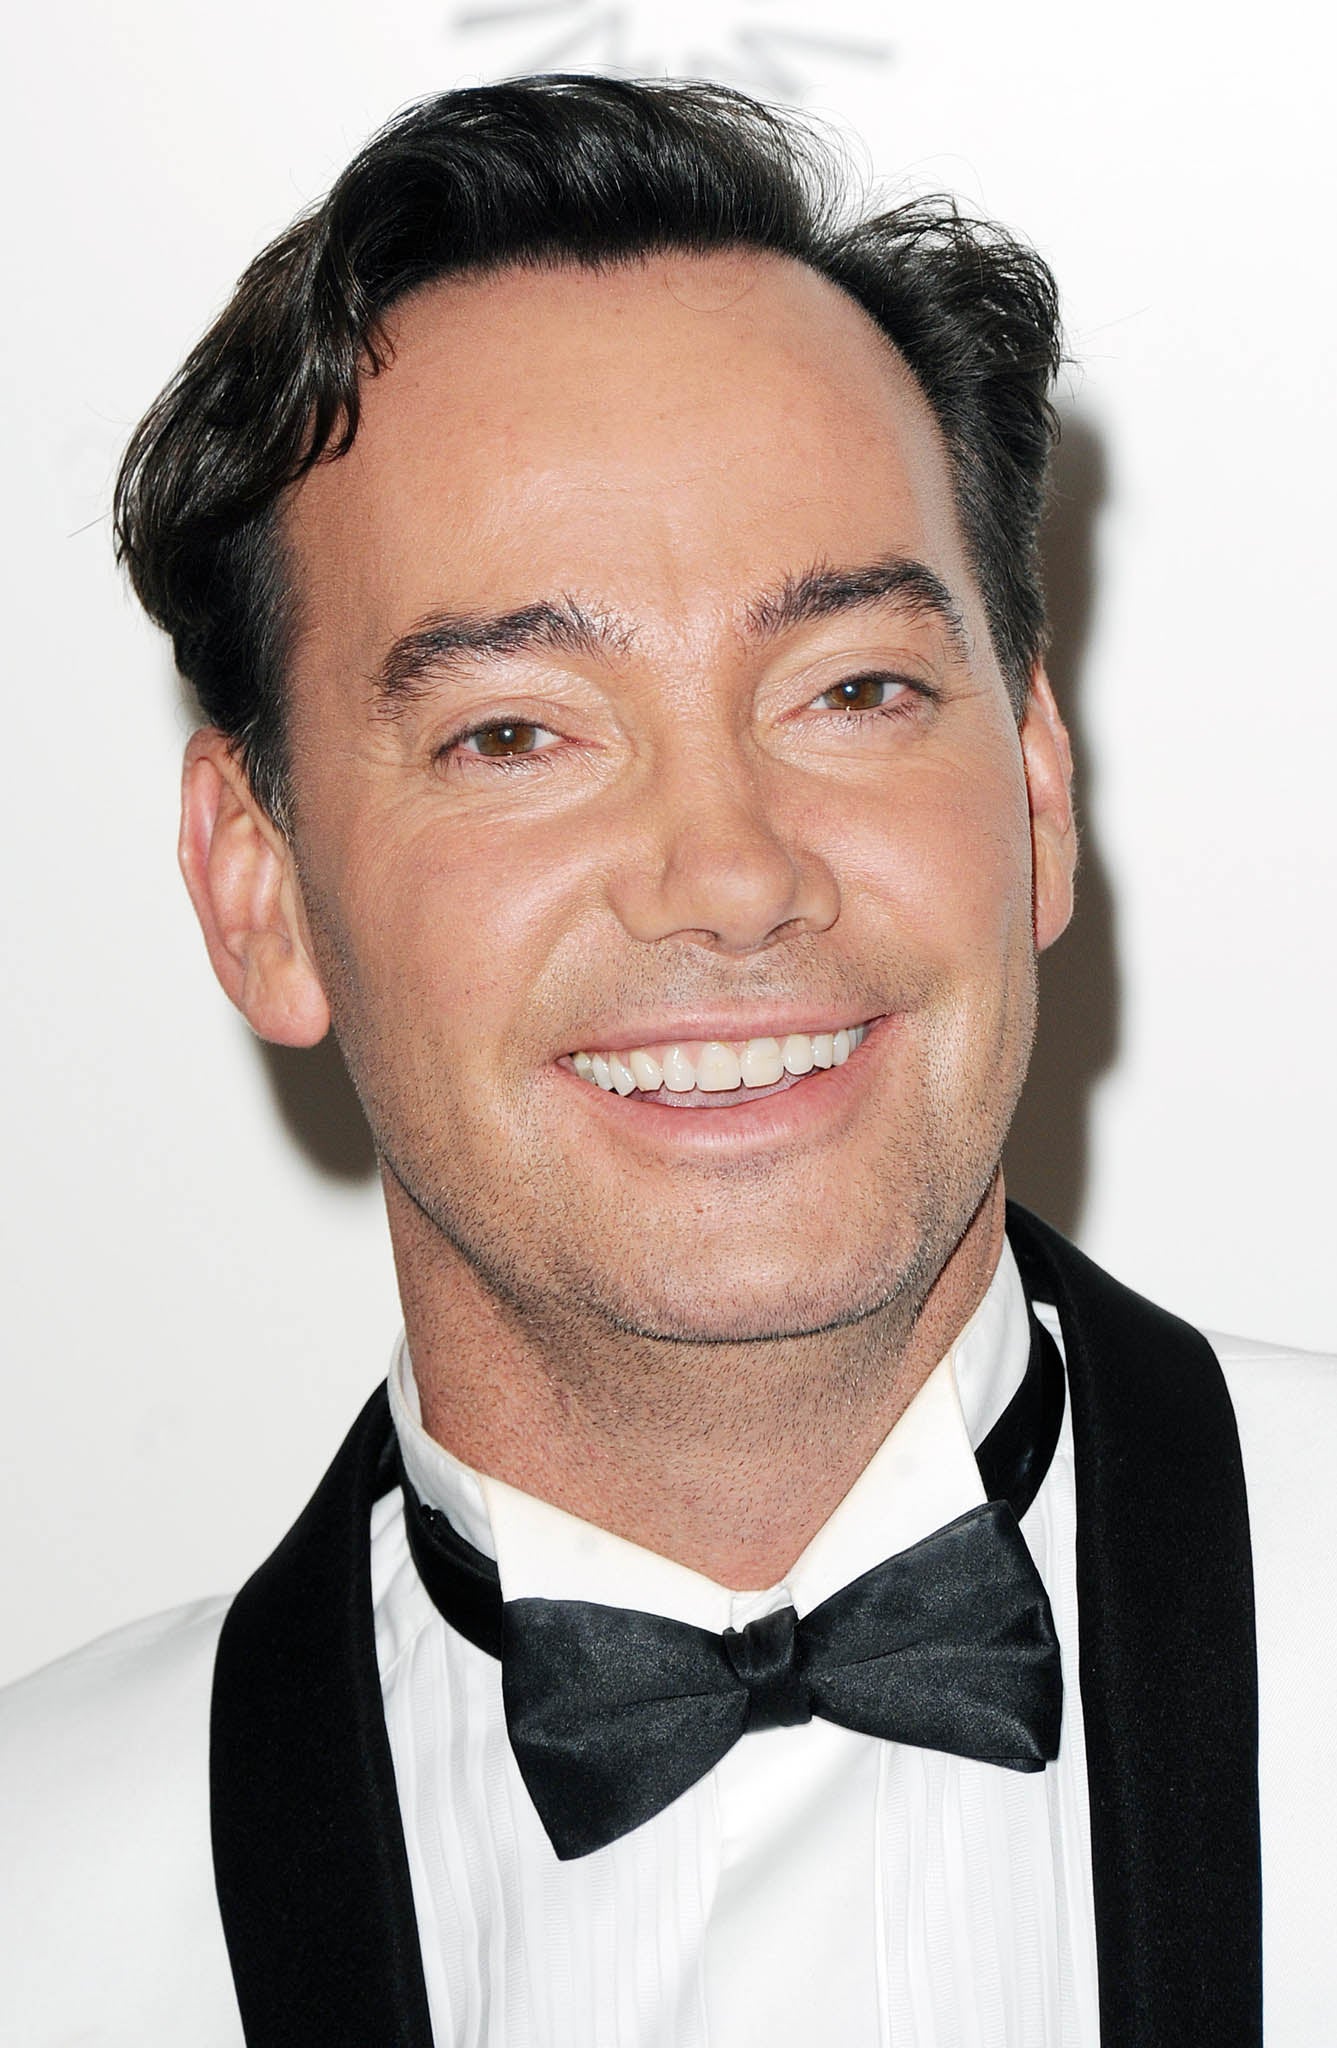 Criag Revel Horwood has announced he will undergo hip replacement surgery